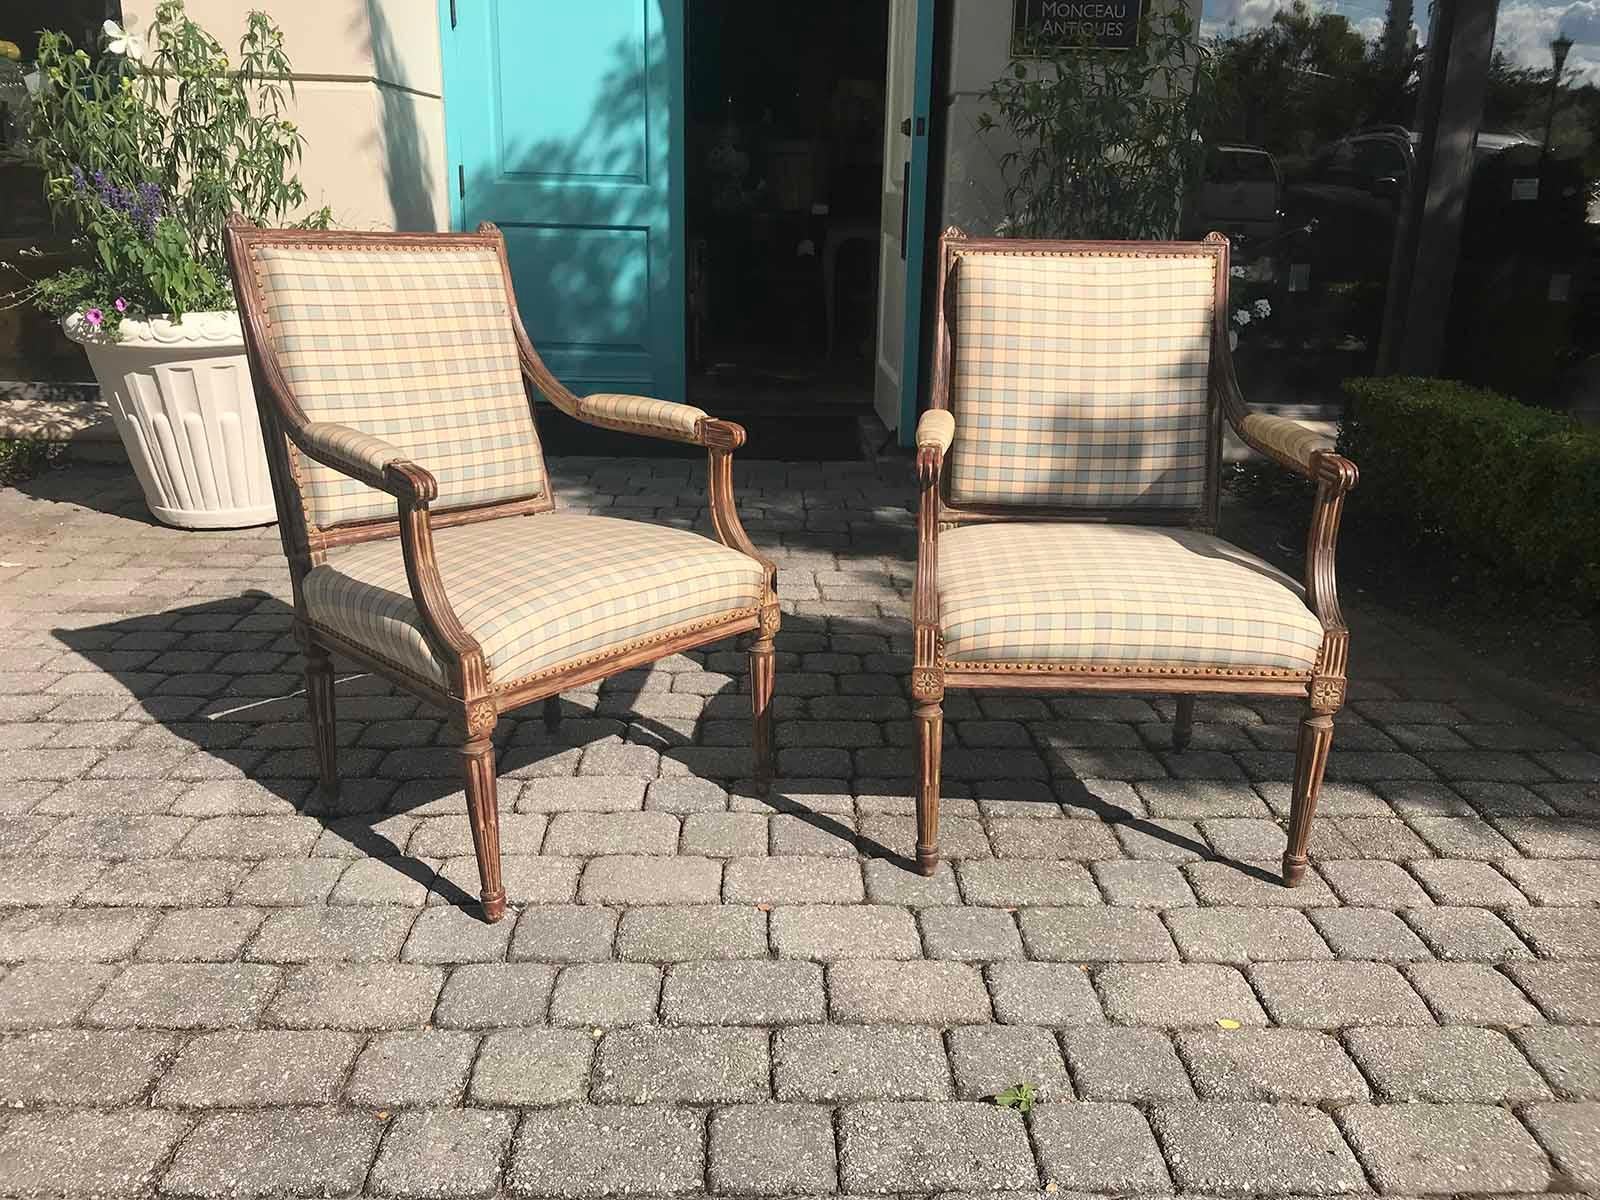 Pair of late 19th-early 20th century Louis XVI armchairs. Measures: Seat height 17.5